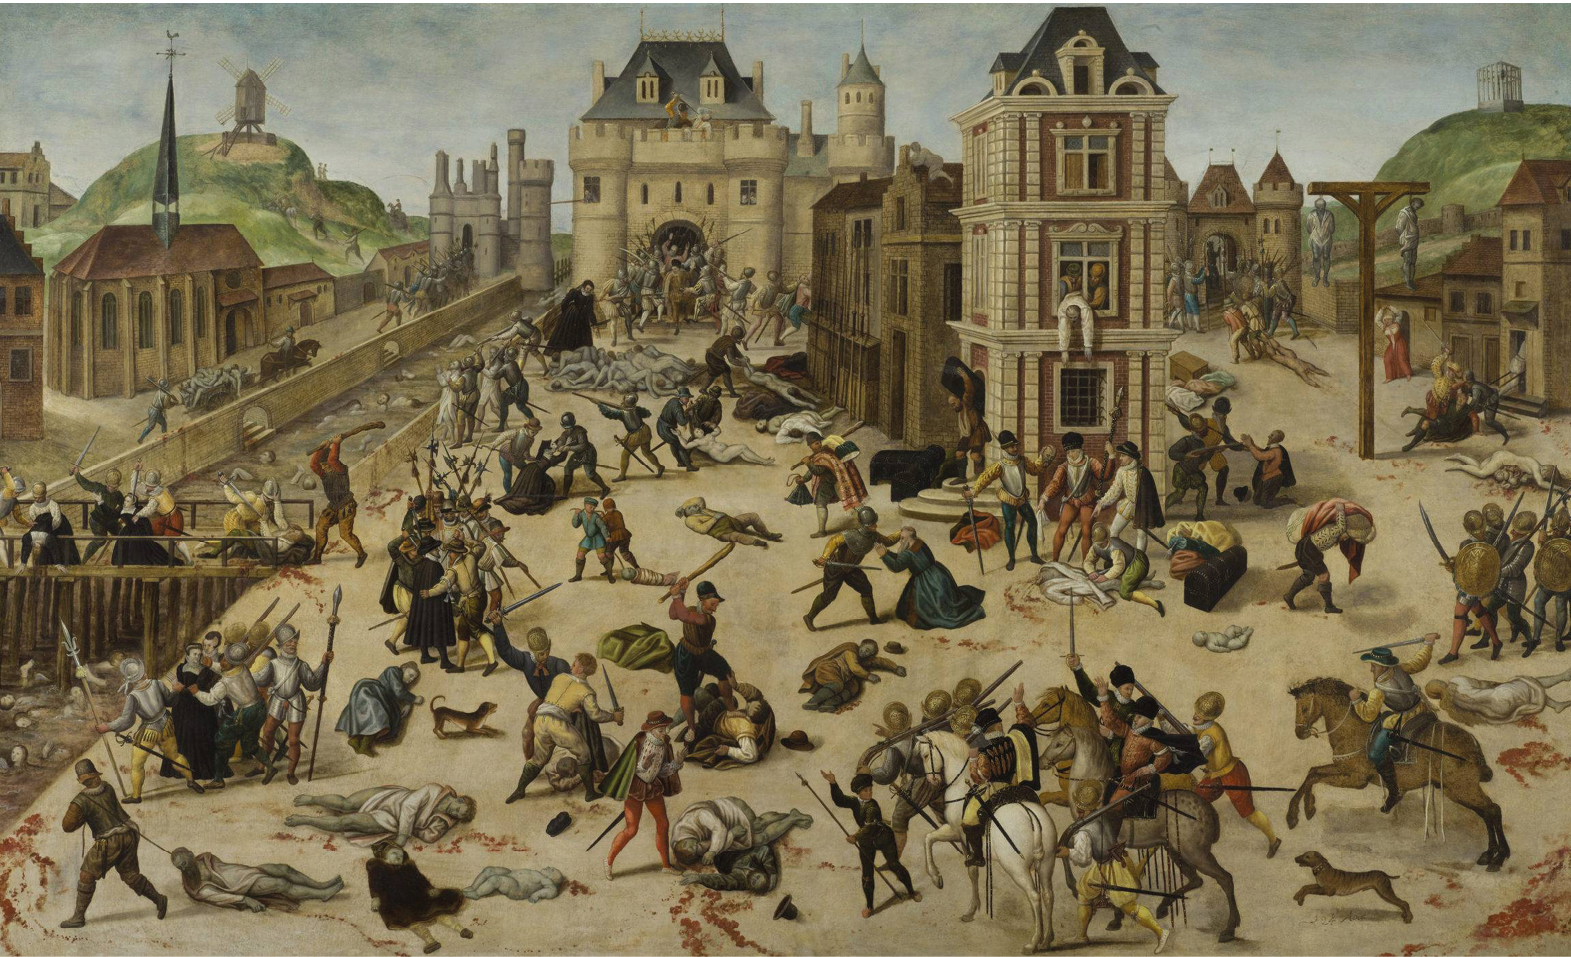 An oil painting ca. 1572-1584 depicting the Saint Bartholomew’s Day Massacre in Paris: shows a consolidated vision of the city of Paris surrounding a square including the Louvre river, a bridge, townhouses, castles, and churches; bloody battle scenes are seen scattered throughout the painting with multiple dead bodies scattered through the floor.